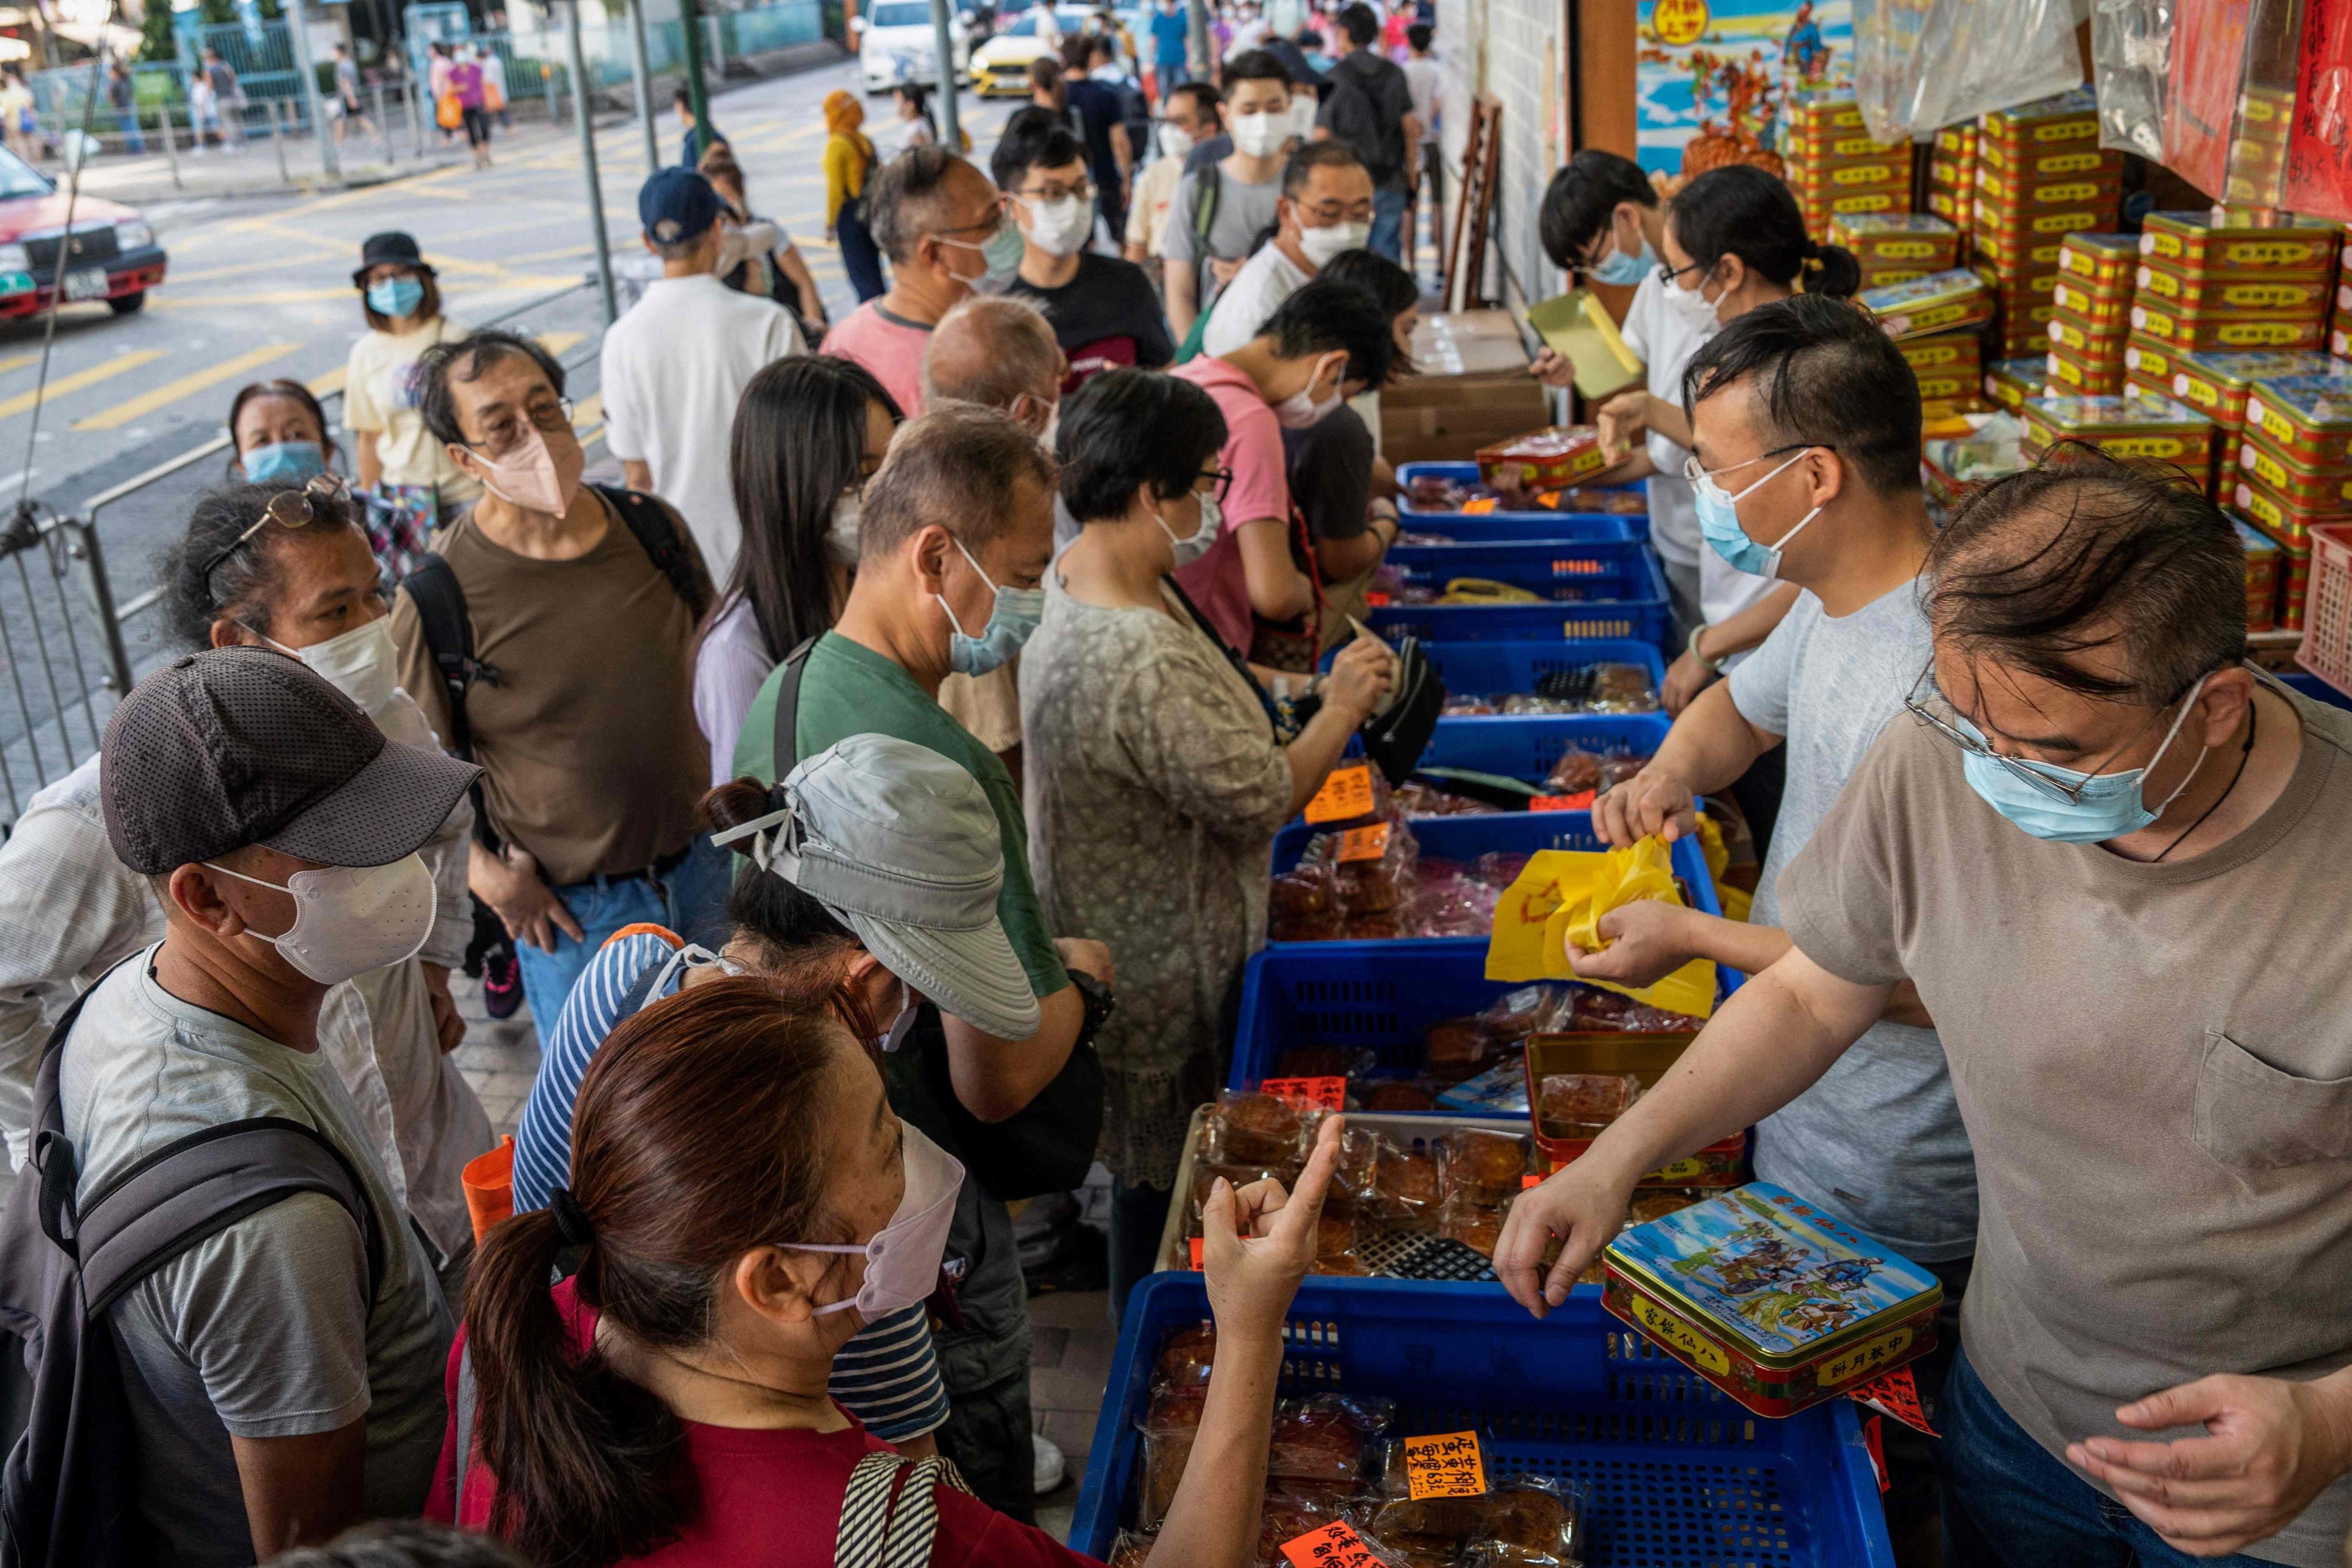 Customers crowd around a stall selling mooncakes ahead of the Mid-Autumn Festival in Hong Kong on September 4. Photo: AFP